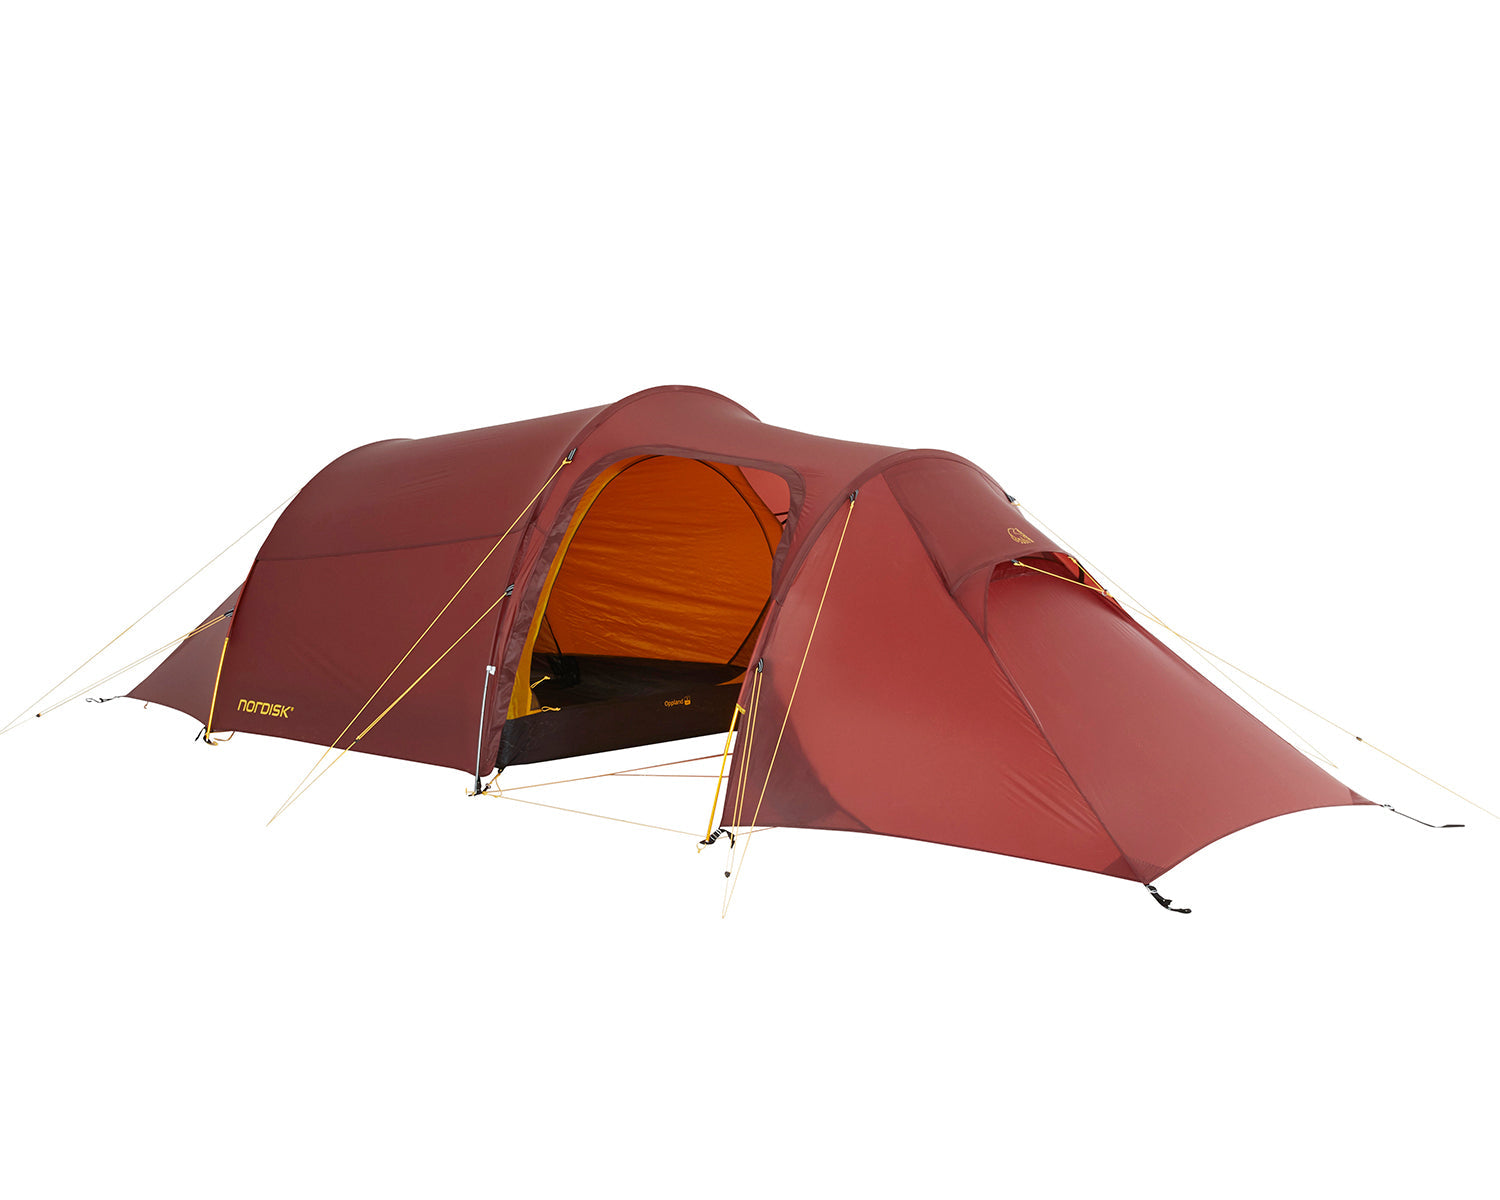 Oppland 2 LW - 2 person - Burnt Red